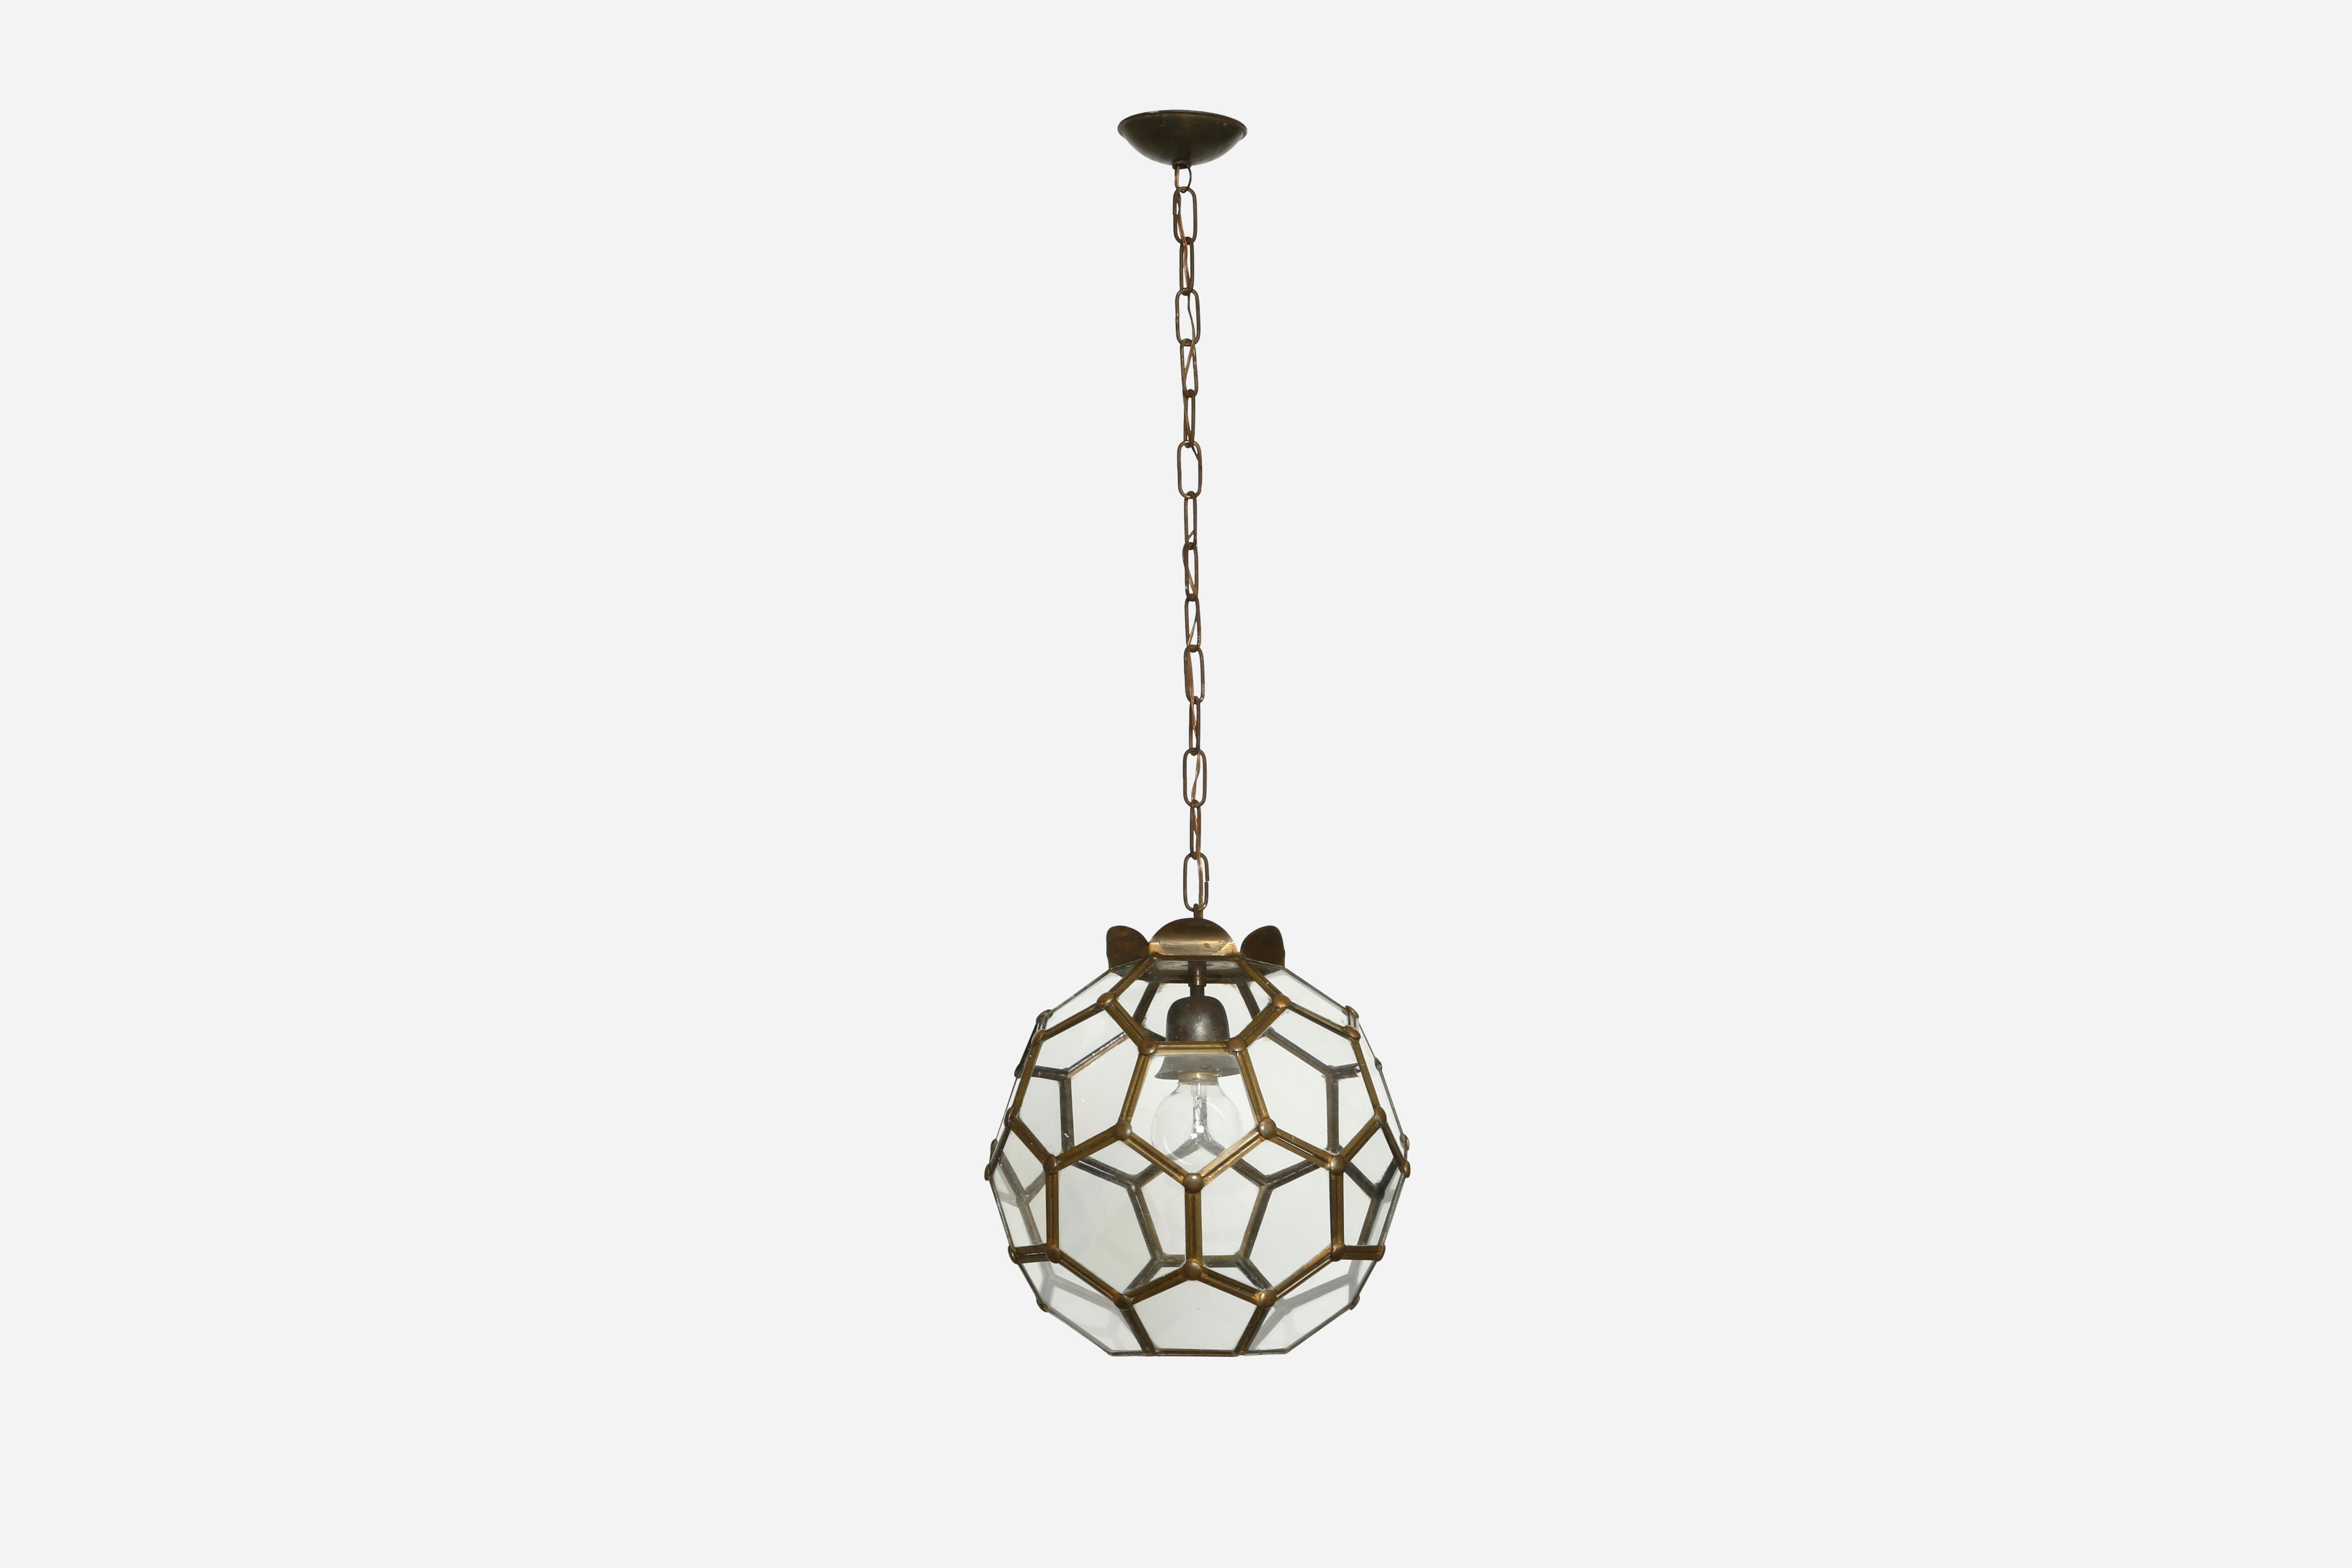 Vienna Secession Adolf Loos Style Ceiling Pendant